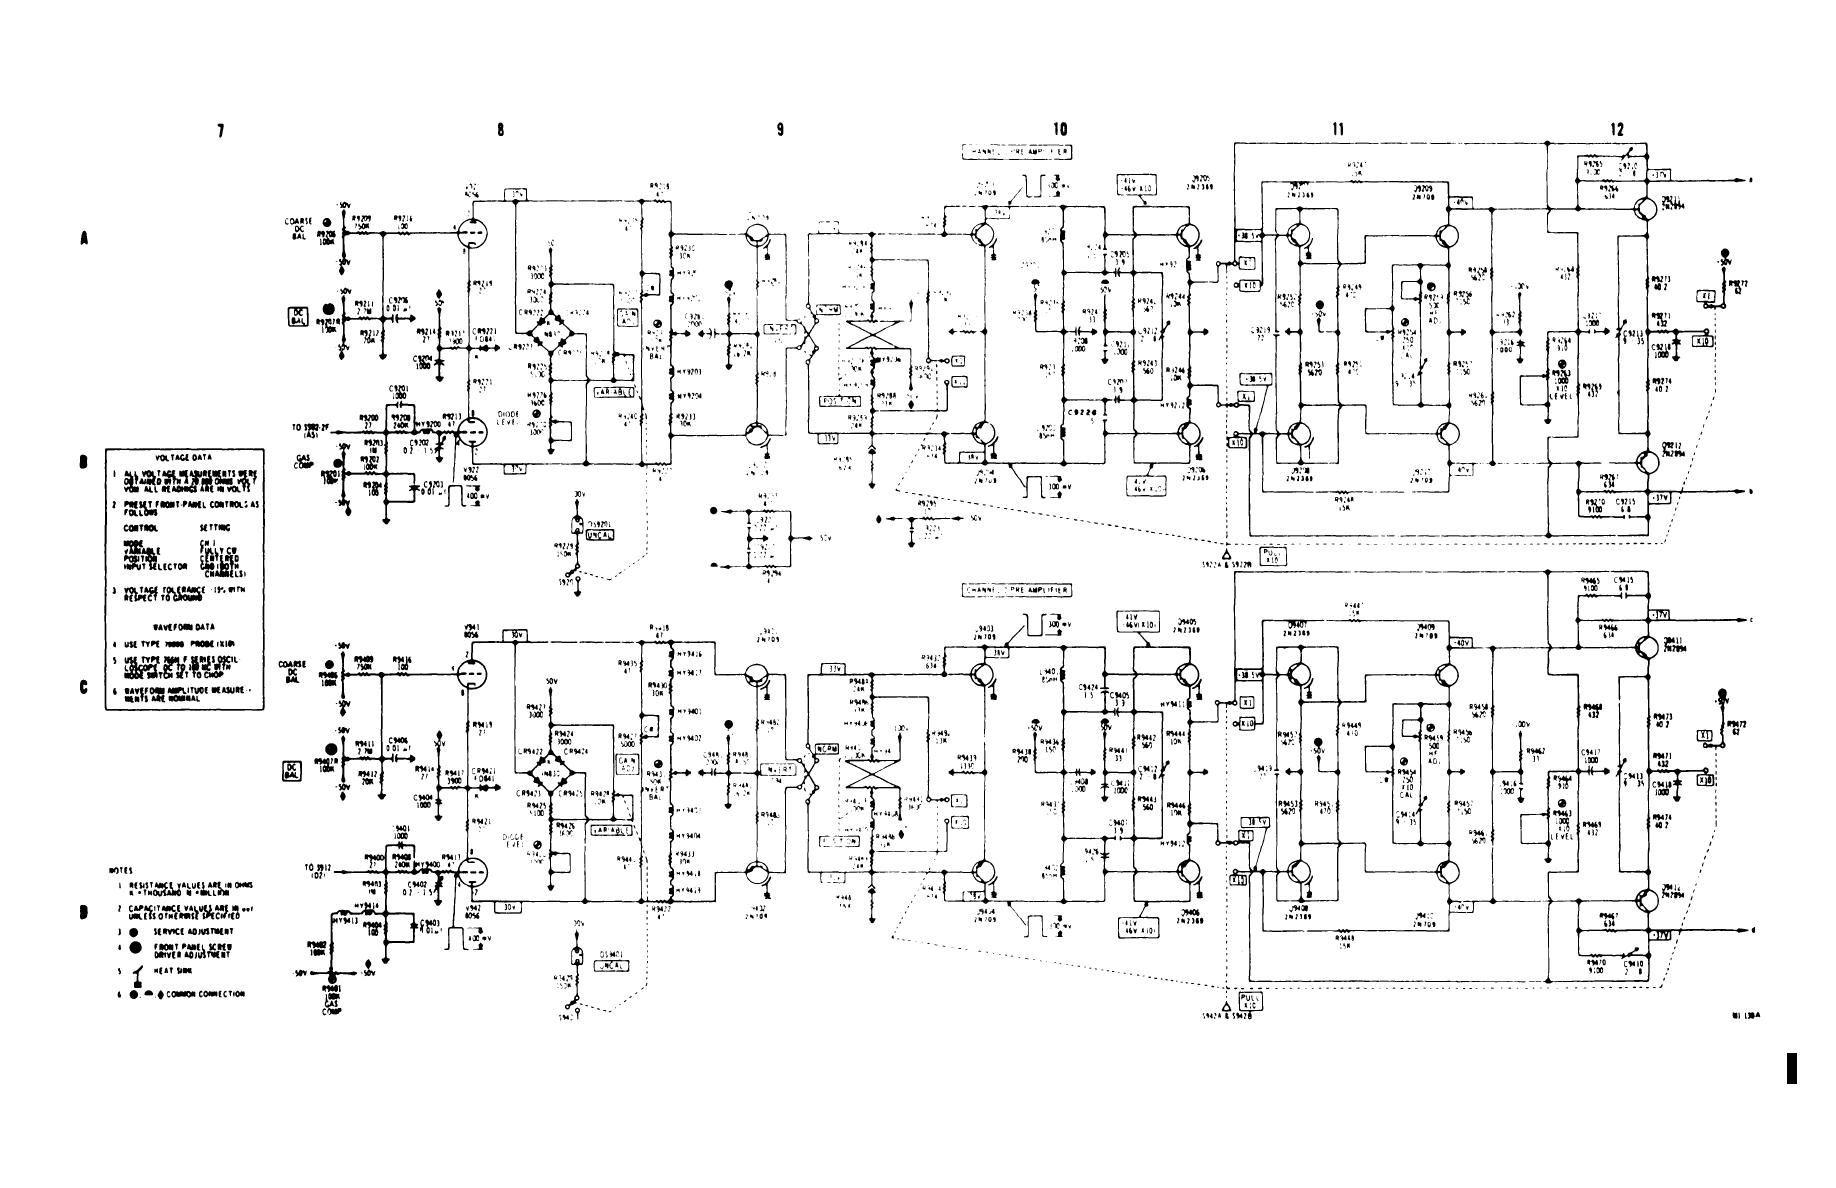 Figure 6-2.1. Dual trace plug-in (type 79-02A with mod 103 and delay ...